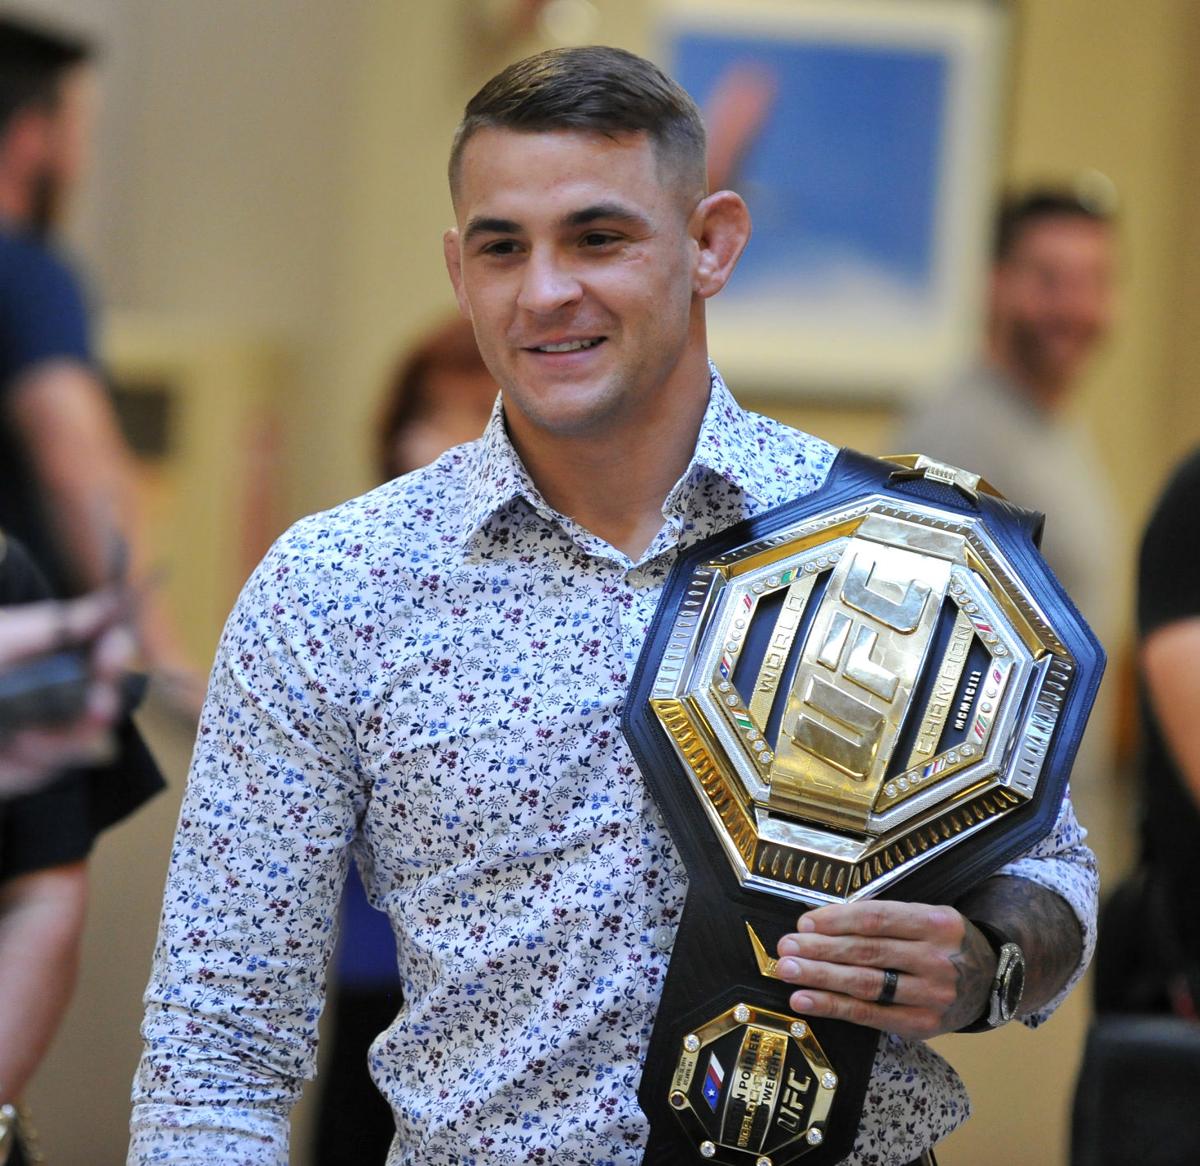 Heart of a champion: Dustin Poirier brings his UFC belt back to Acadiana, gets key to the city